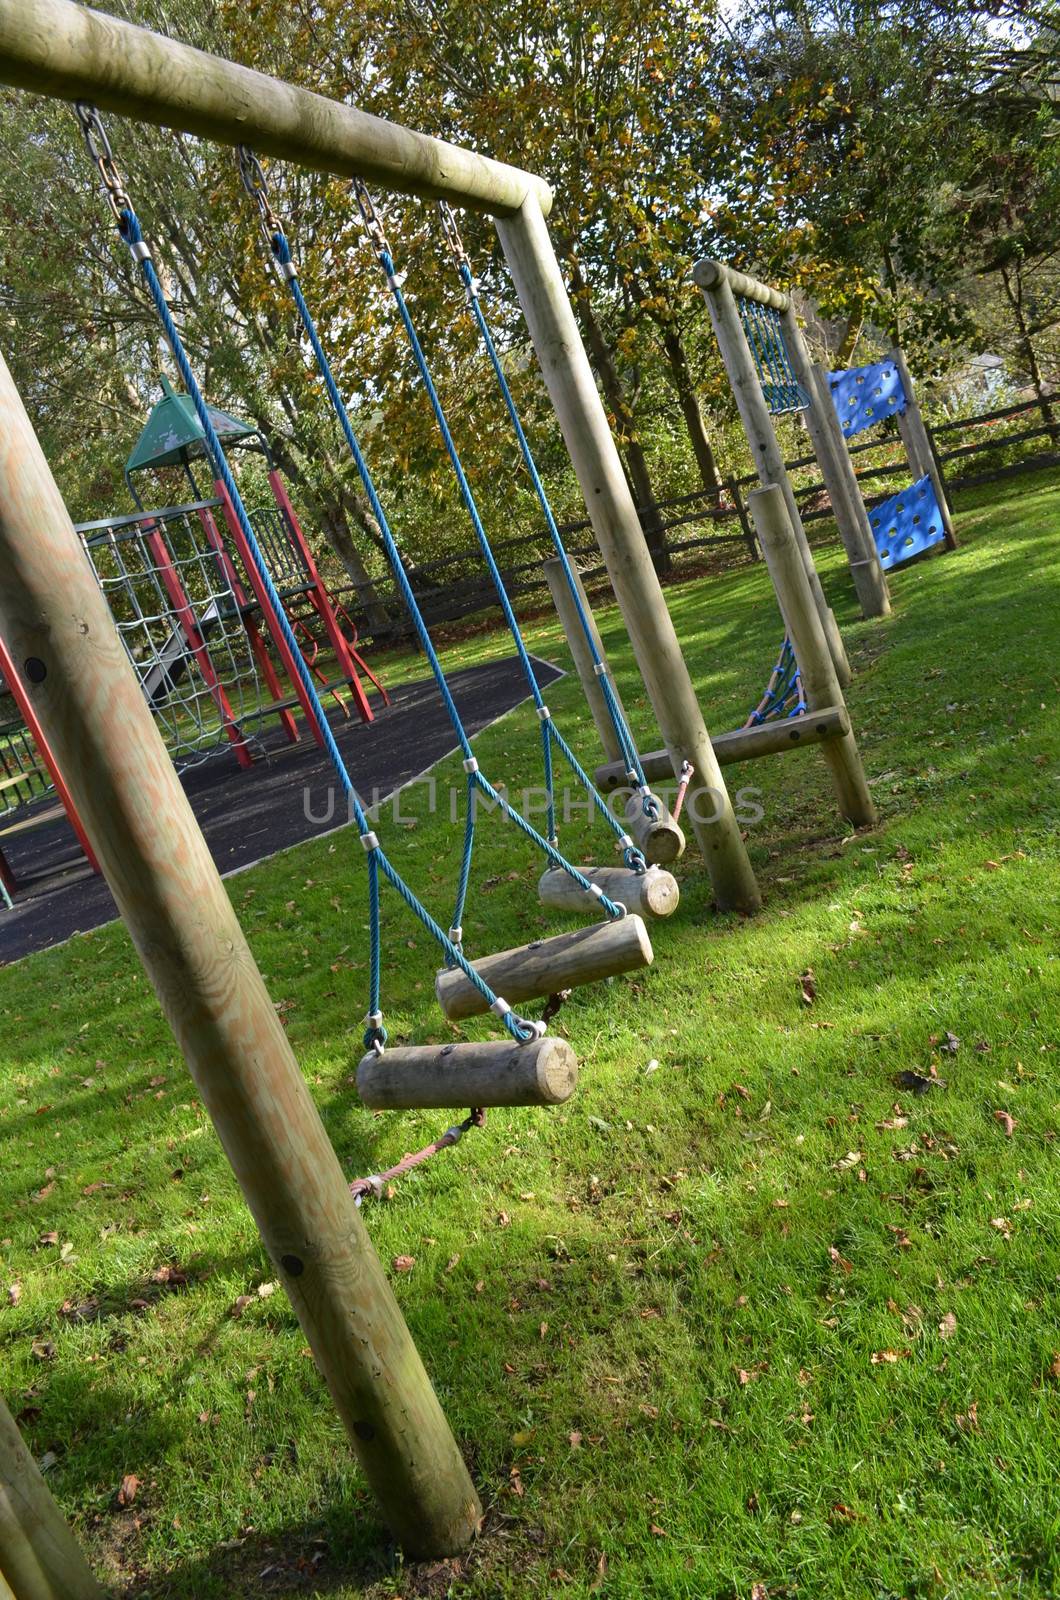 Children's play park with an assortment of play equipment.